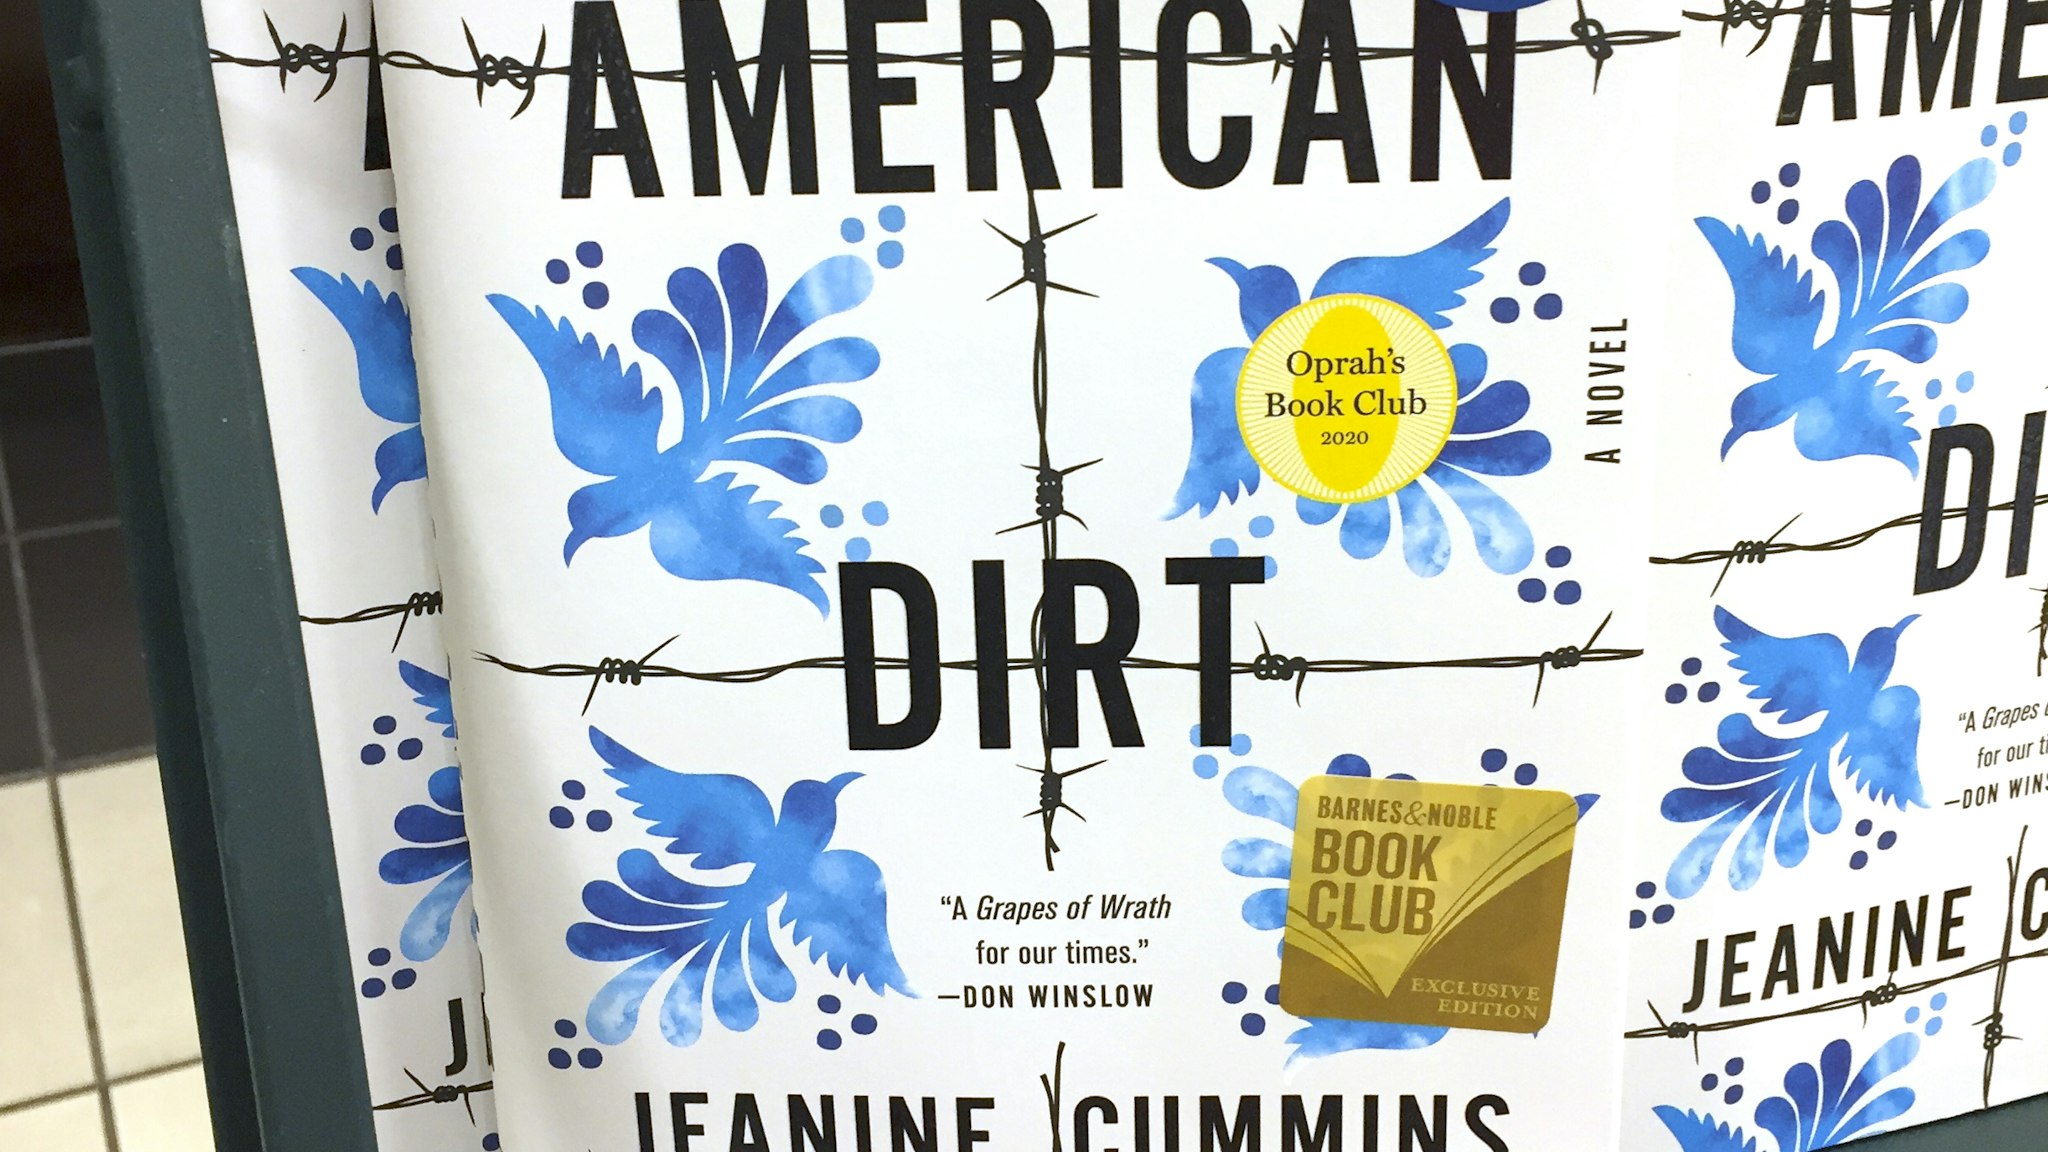 Photo shows "American Dirt" books sitting on a rack at a bookstore in New York on January 30, 2020. - The book by American author Jeanine Cummins tells the story of a Mexican woman who escaped as an illegal immigrant to the United States with her son. The publisher canceled the scheduled book tour amidst controversy and safety concerns. (Photo by Laura BONILLA CAL / AFP) (Photo by LAURA BONILLA CAL/AFP via Getty Images)